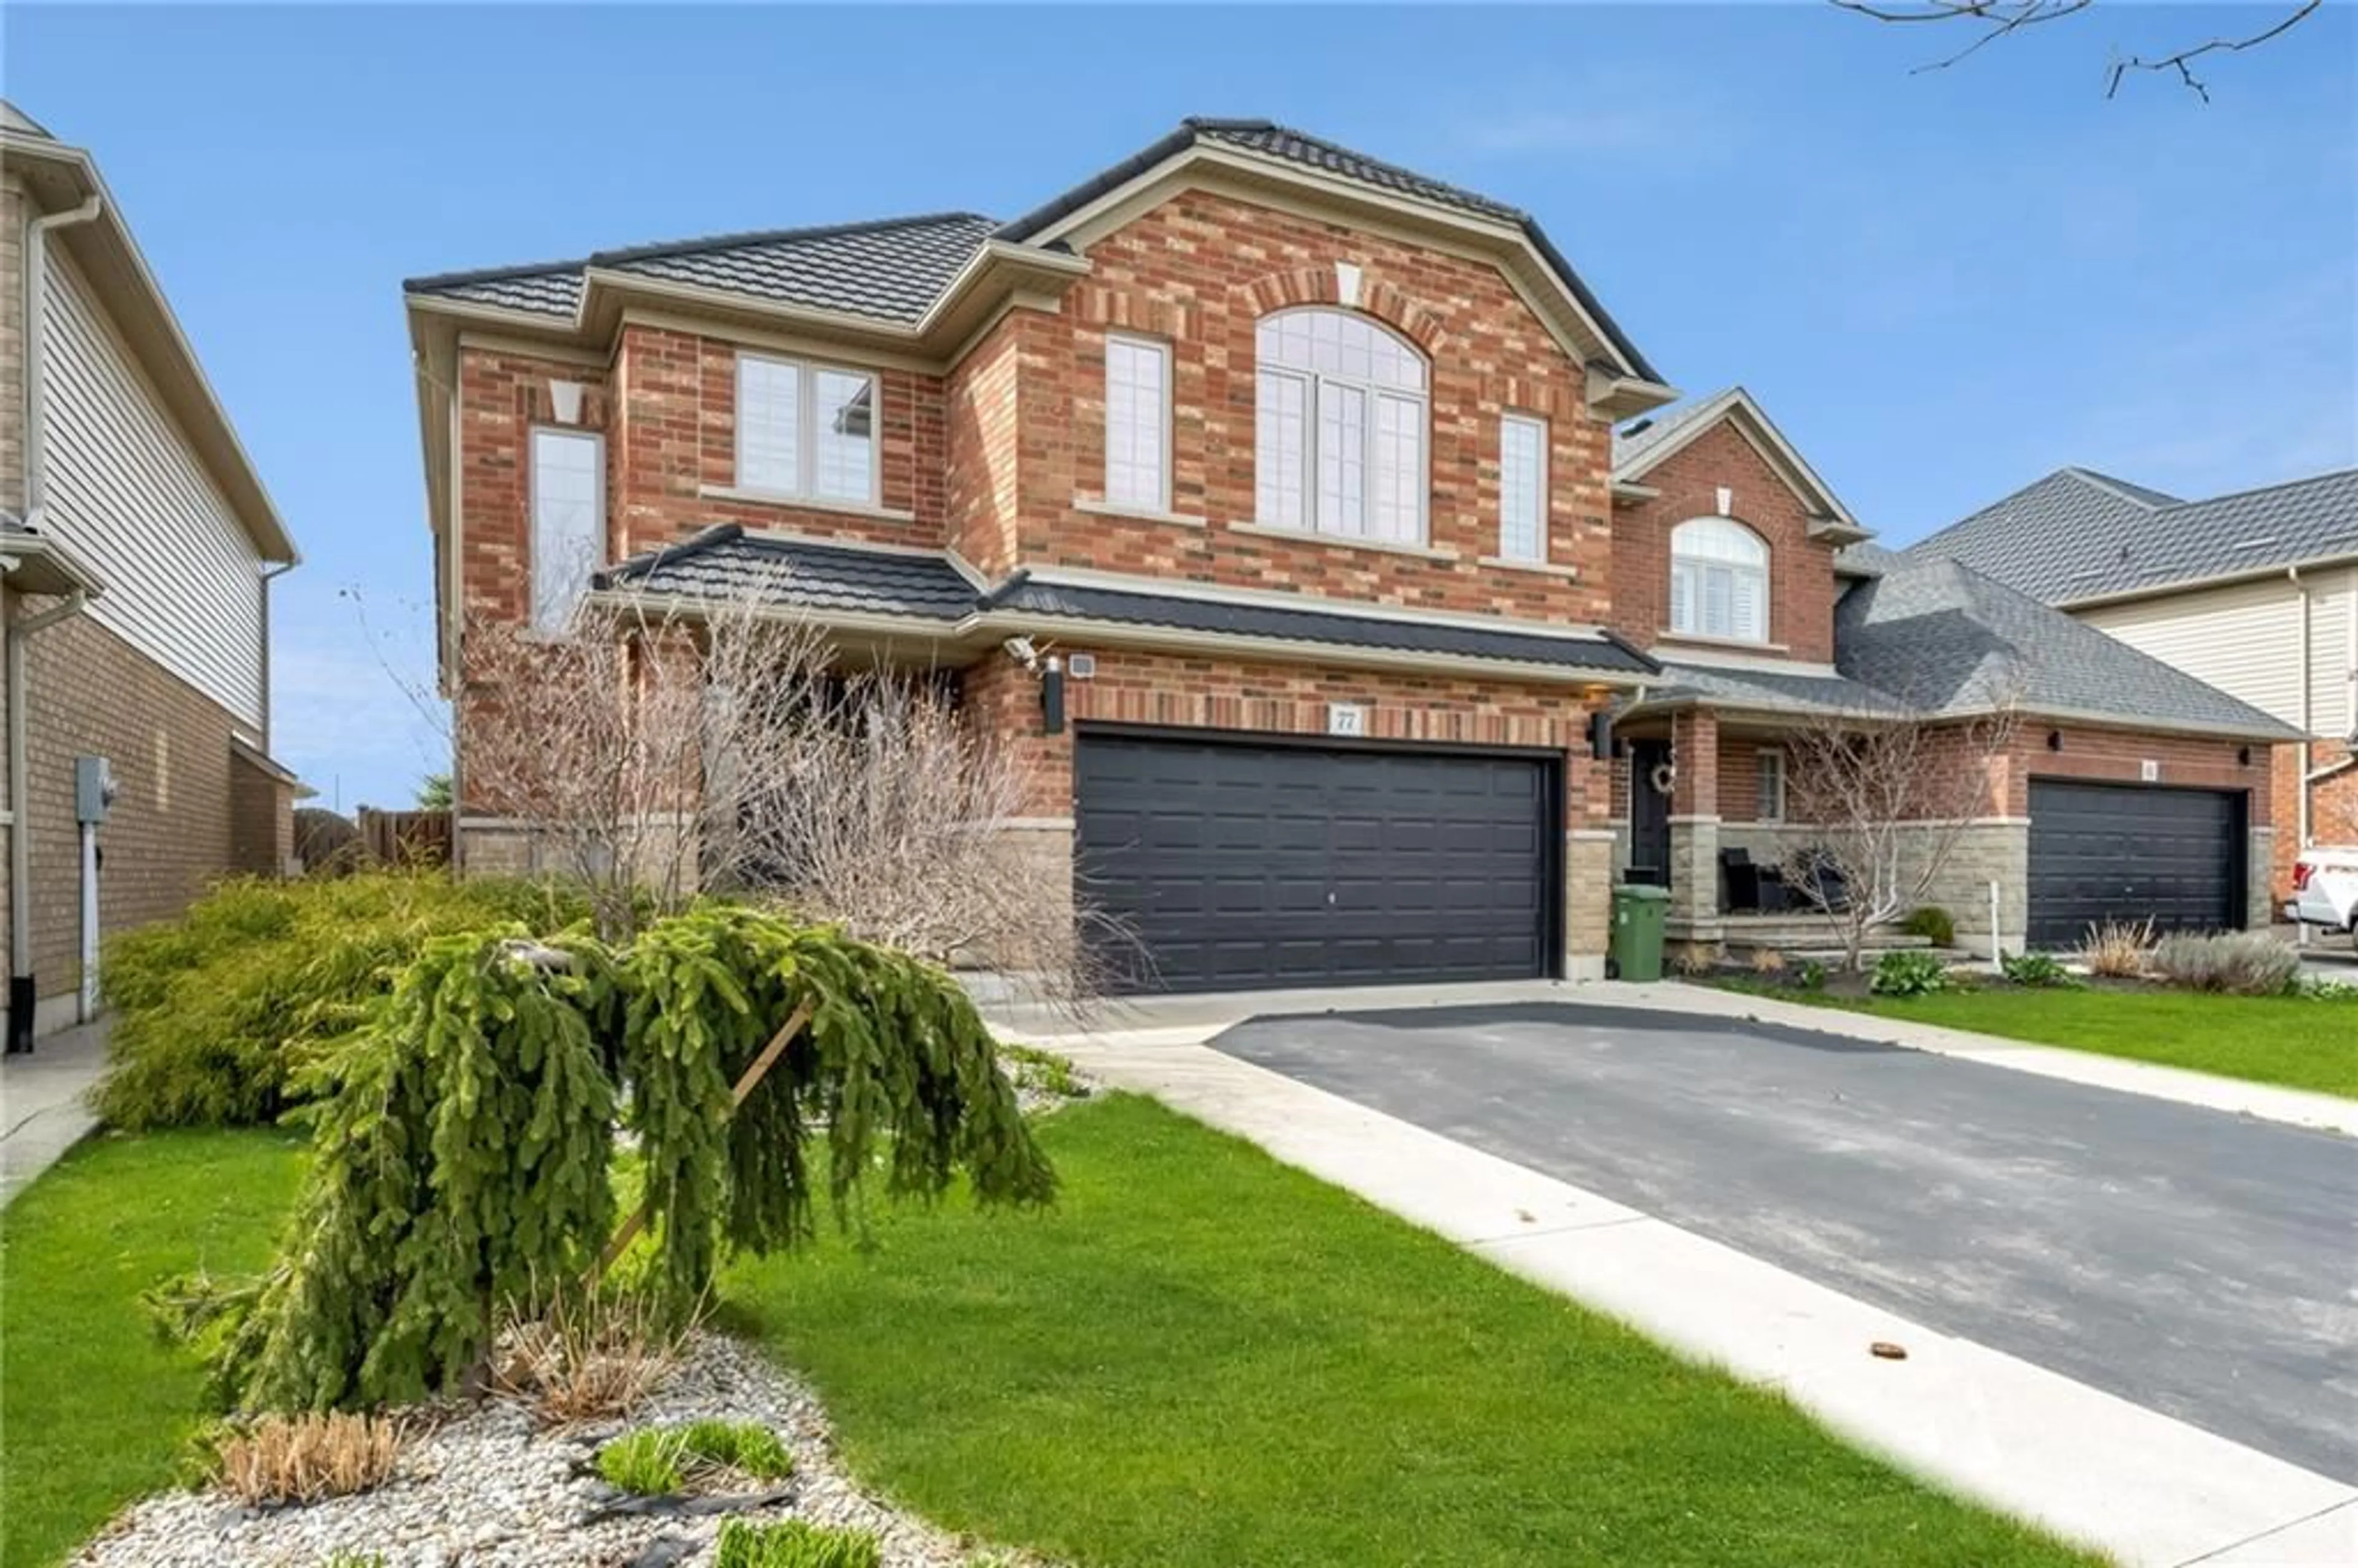 Home with brick exterior material for 77 Tanglewood Dr, Binbrook Ontario L0R 1C0